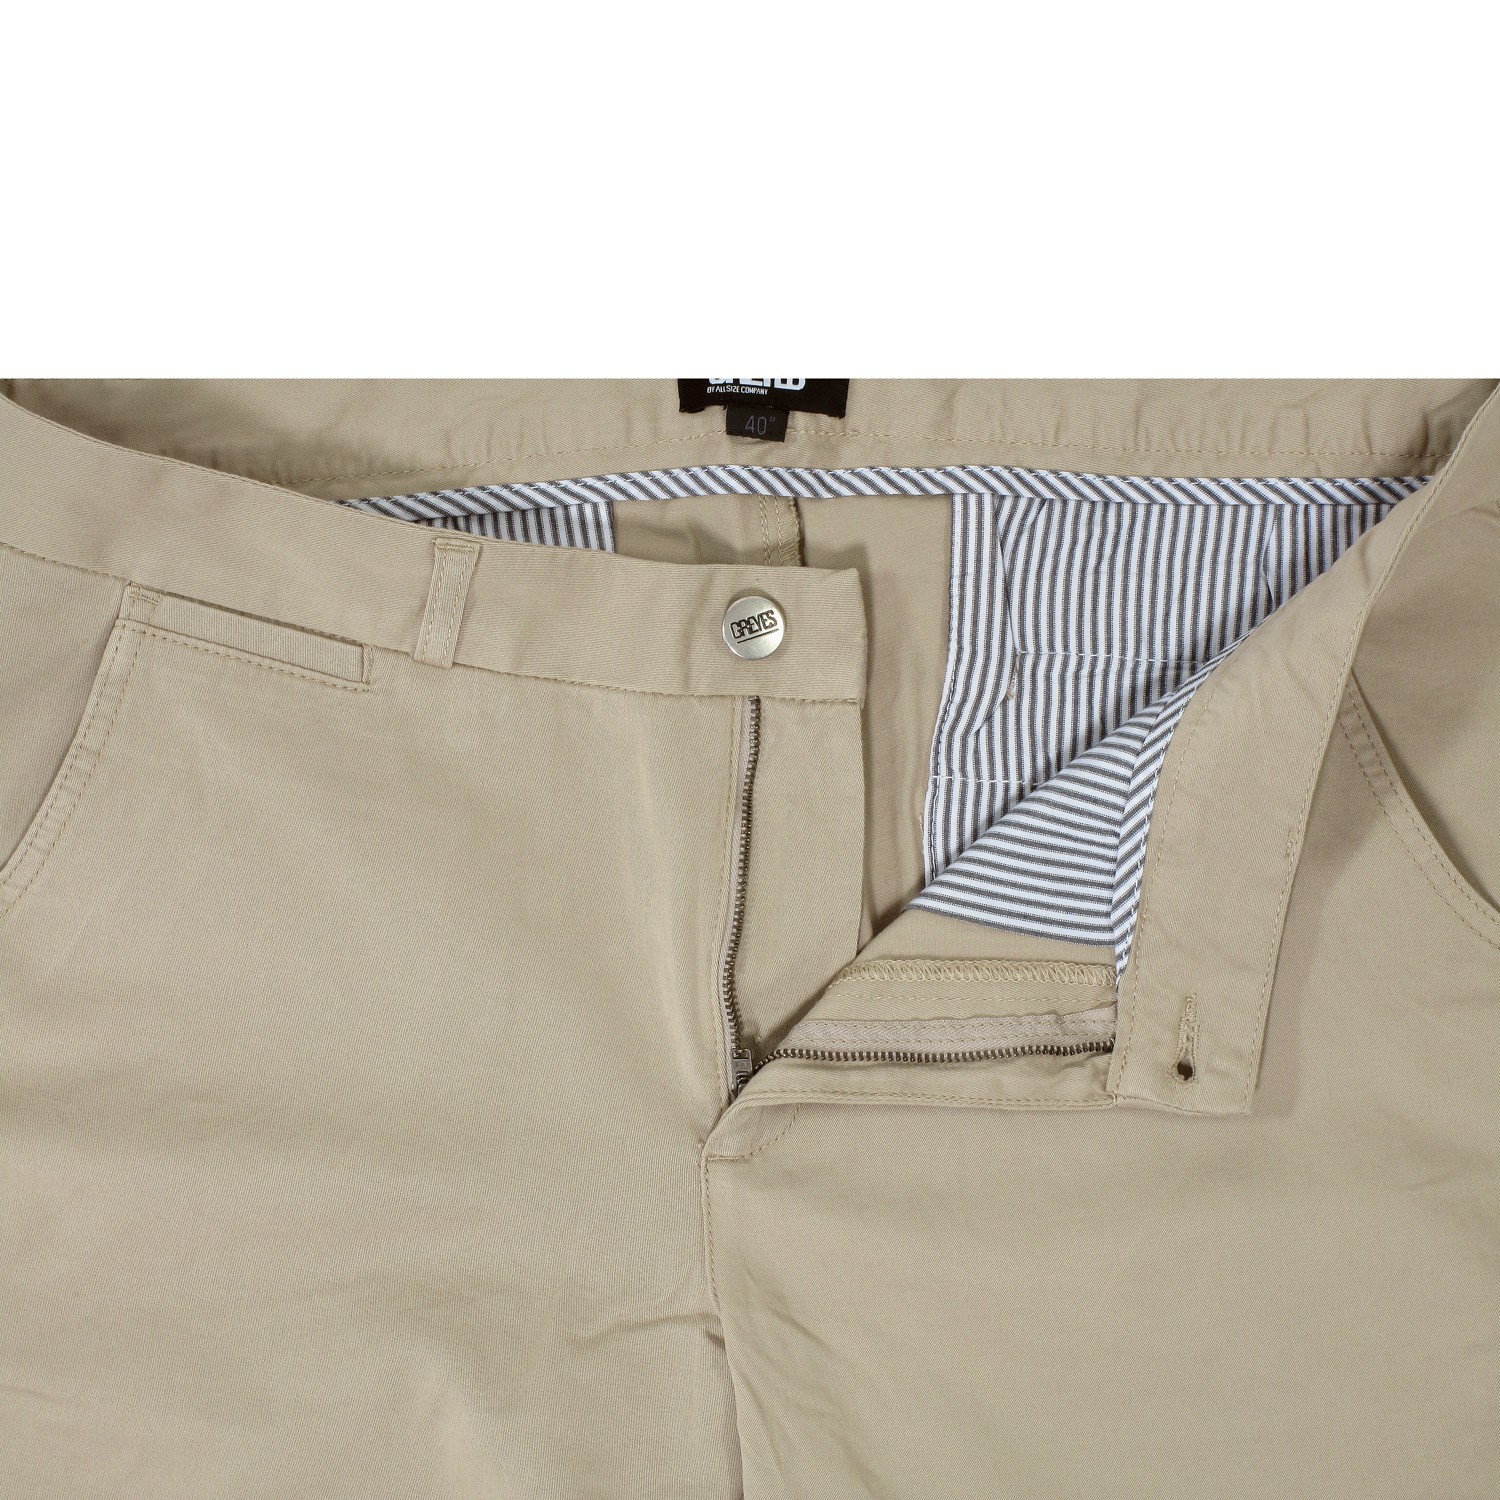 Beige stretch chino trousers by Greyes in plus sizes up to 64